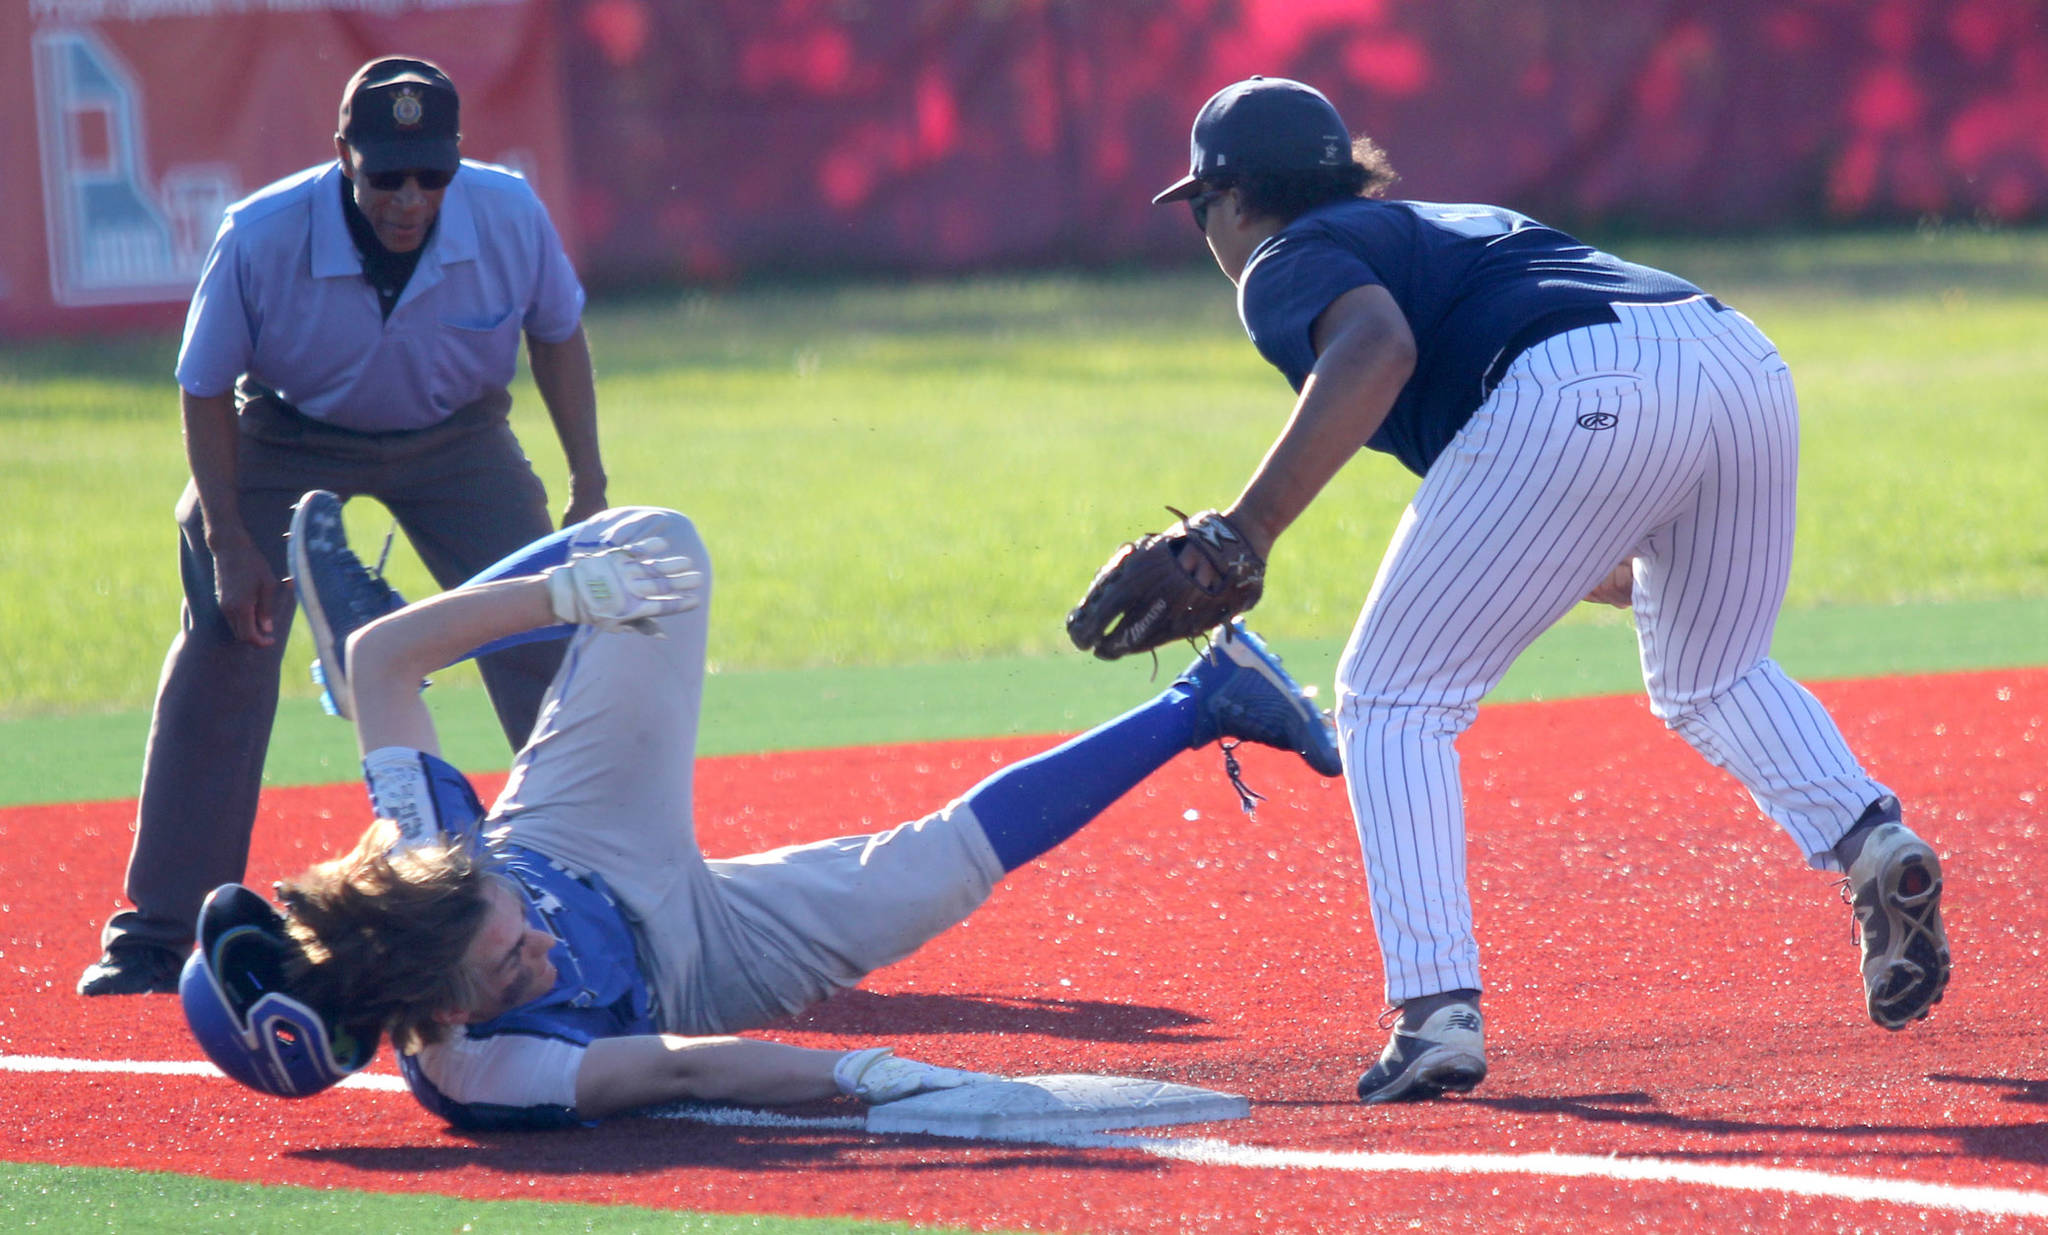 Soldotna third baseman Atticus Gibson gets the tag before Palmer’s Dylan Garrettson slides into third during Palmer’s 7-1 win over the Stars in the Division II state semifinals Friday, June 4, 2021, at Wasilla High School in Wasilla, Alaska. (Photo by Jeremiah Bartz/Frontiersman)